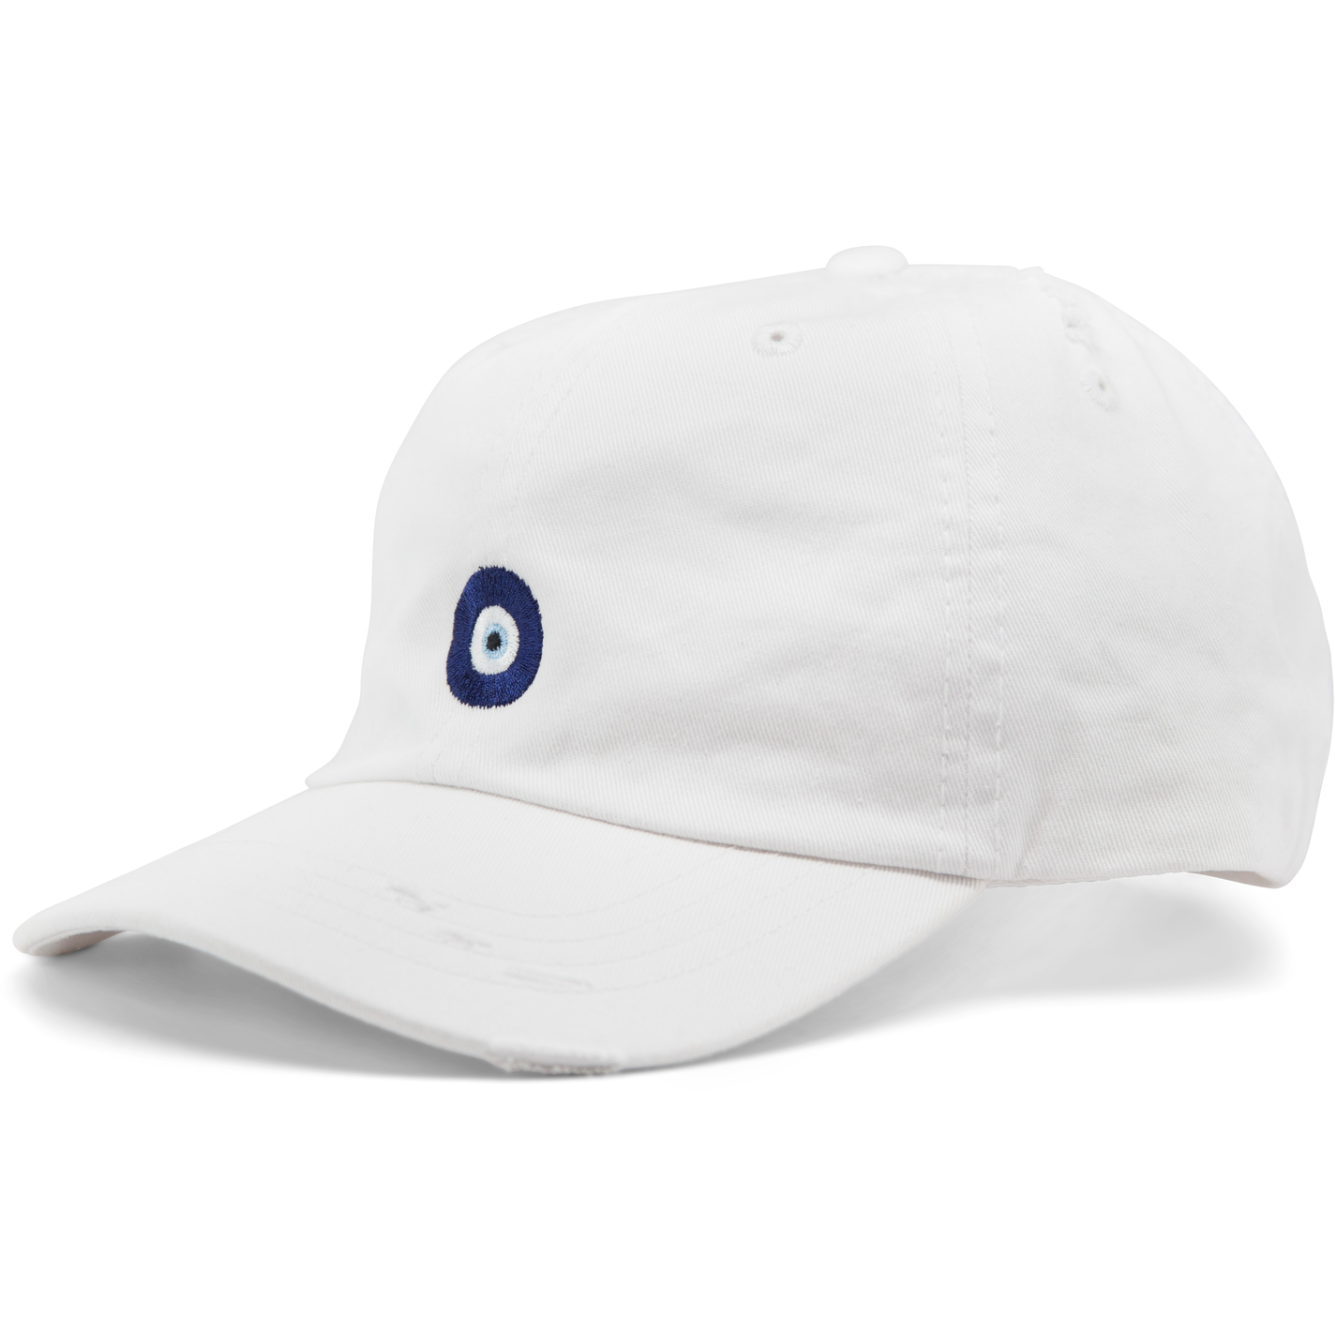 6-panel unconstructed 100% Cotton white dad hat featuring evil eye embroidery on the front and Bled logo embroidered on the back. Third Eye Hat